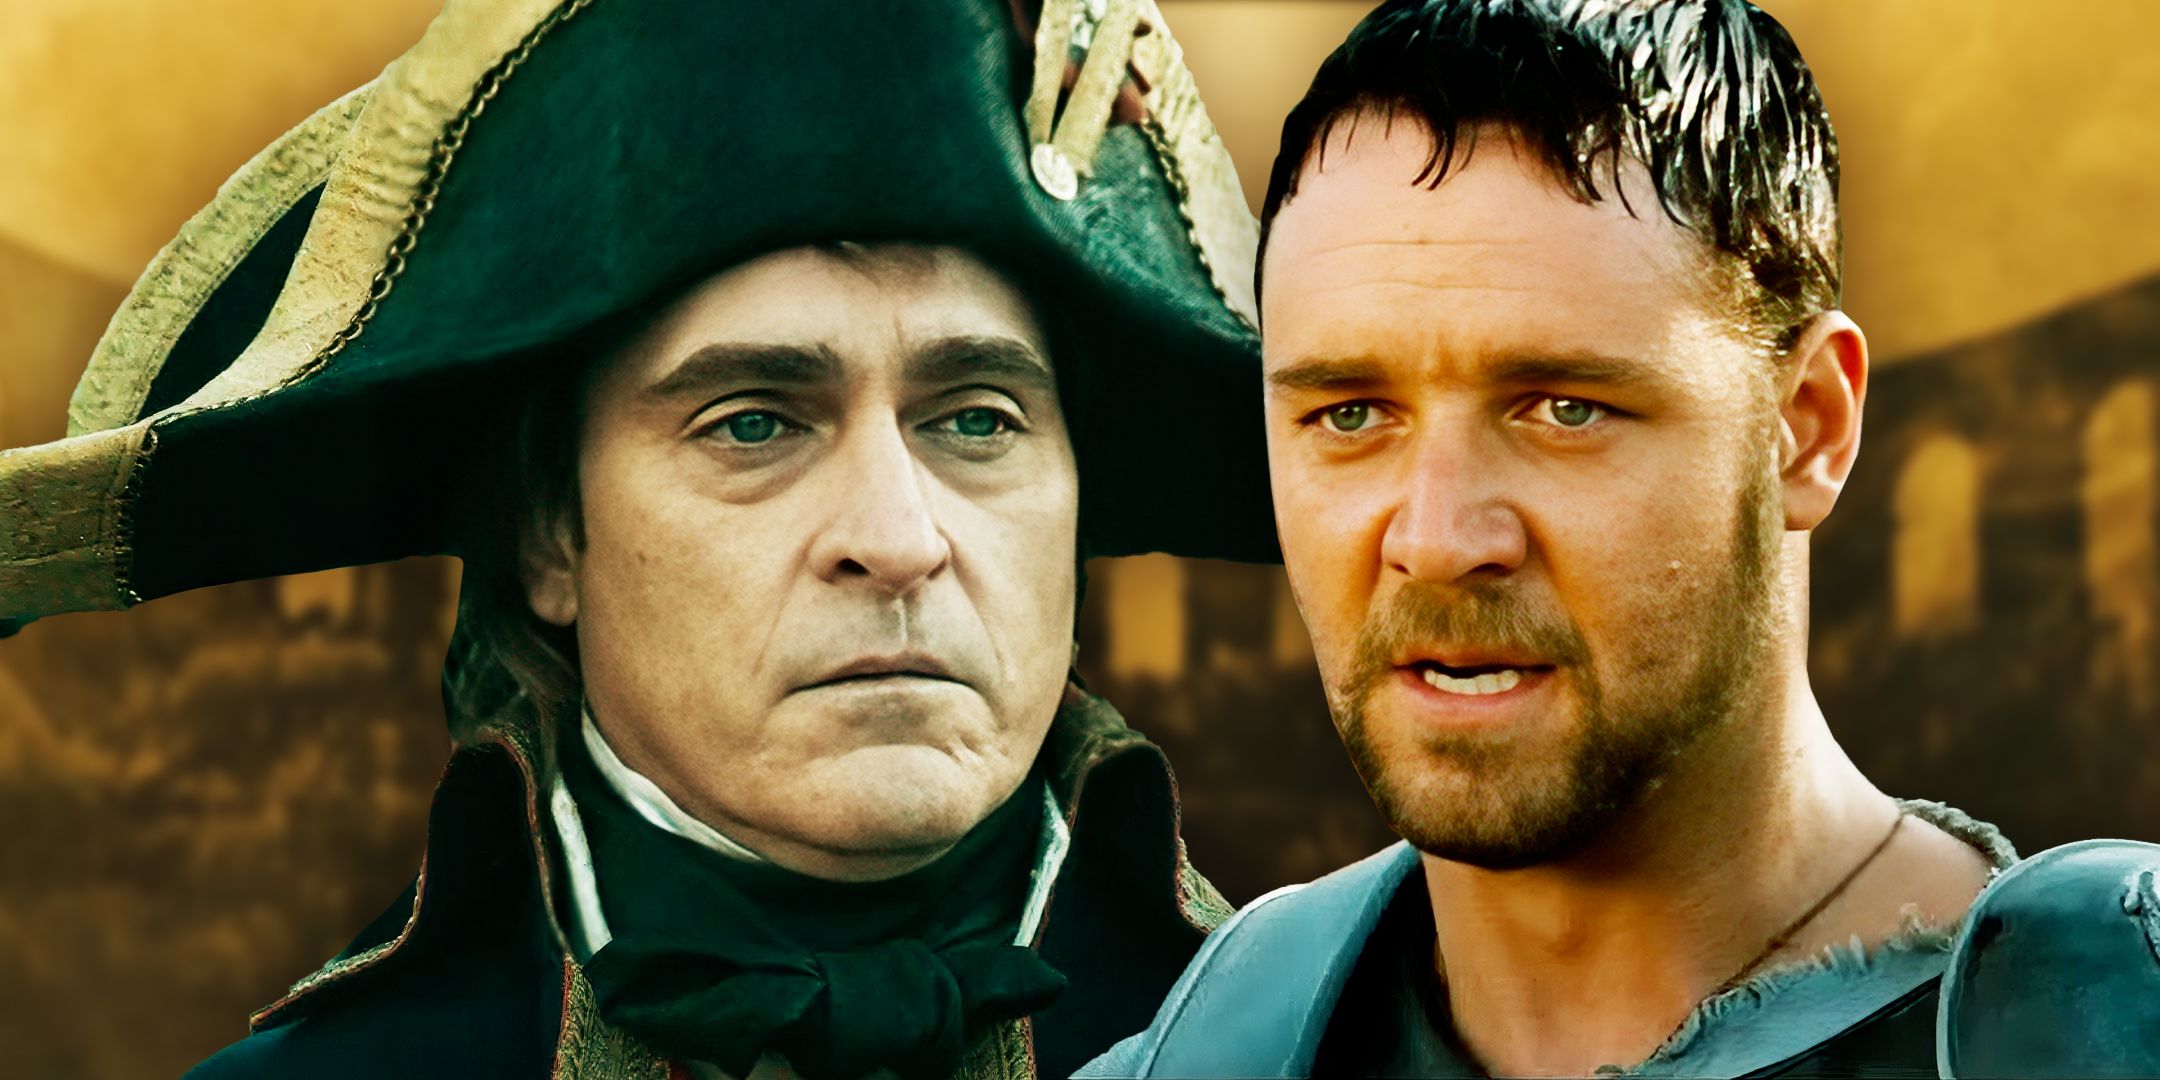 Russell-Crowe-as-Maximus-from-Gladiator-and-Joaquin-Phoenix-as-Napoleon-Bonaparte-from-Napoleon